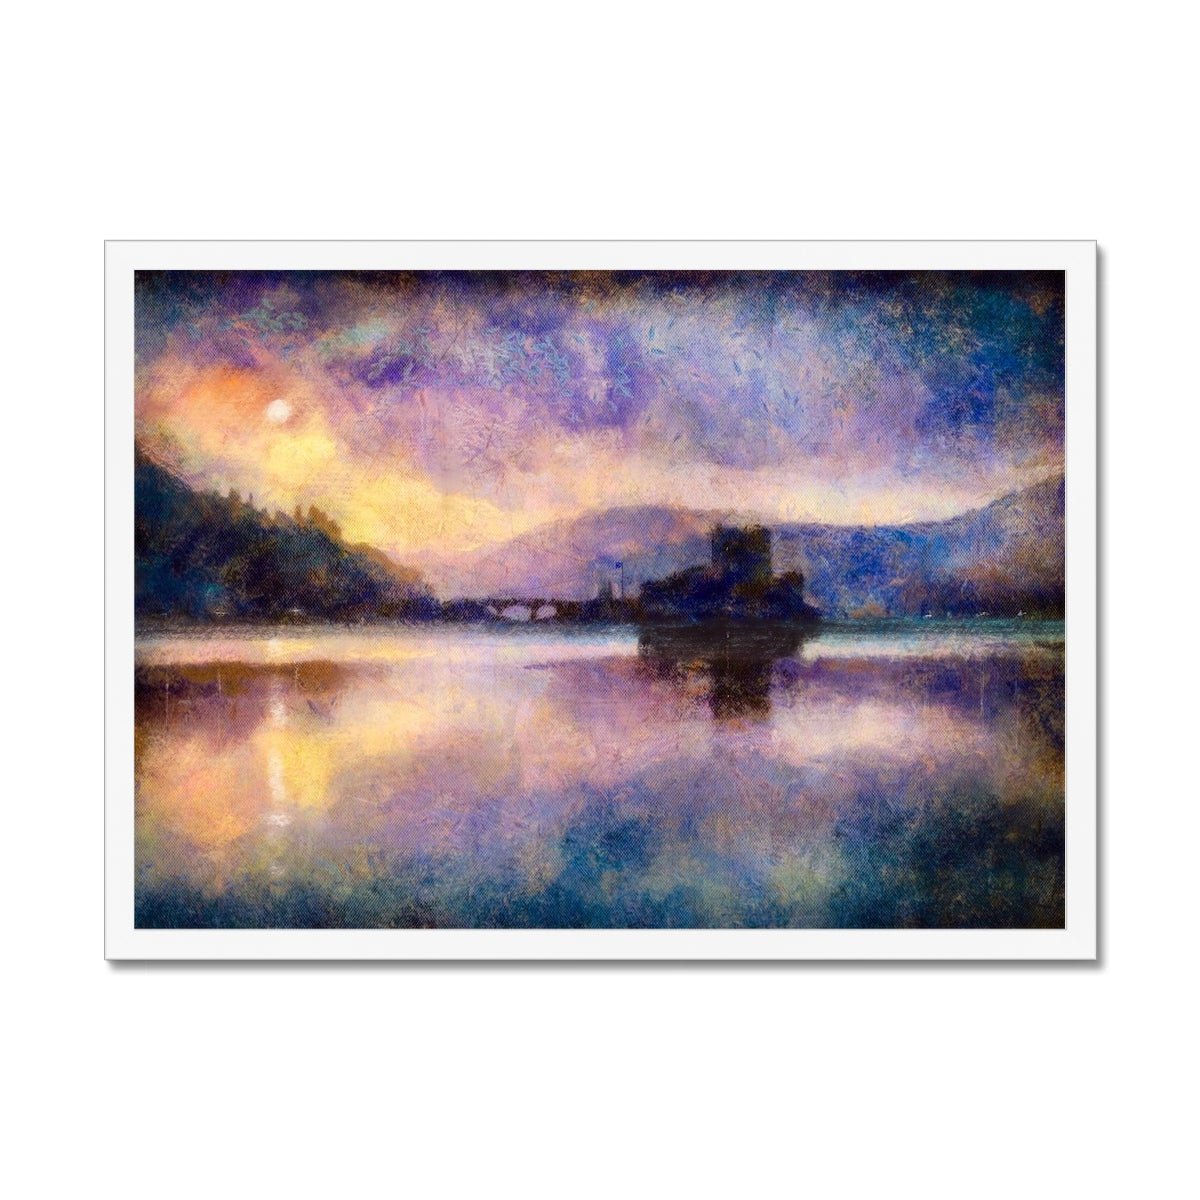 Eilean Donan Castle Moonlight Painting | Framed Prints From Scotland-Framed Prints-Historic & Iconic Scotland Art Gallery-A2 Landscape-White Frame-Paintings, Prints, Homeware, Art Gifts From Scotland By Scottish Artist Kevin Hunter